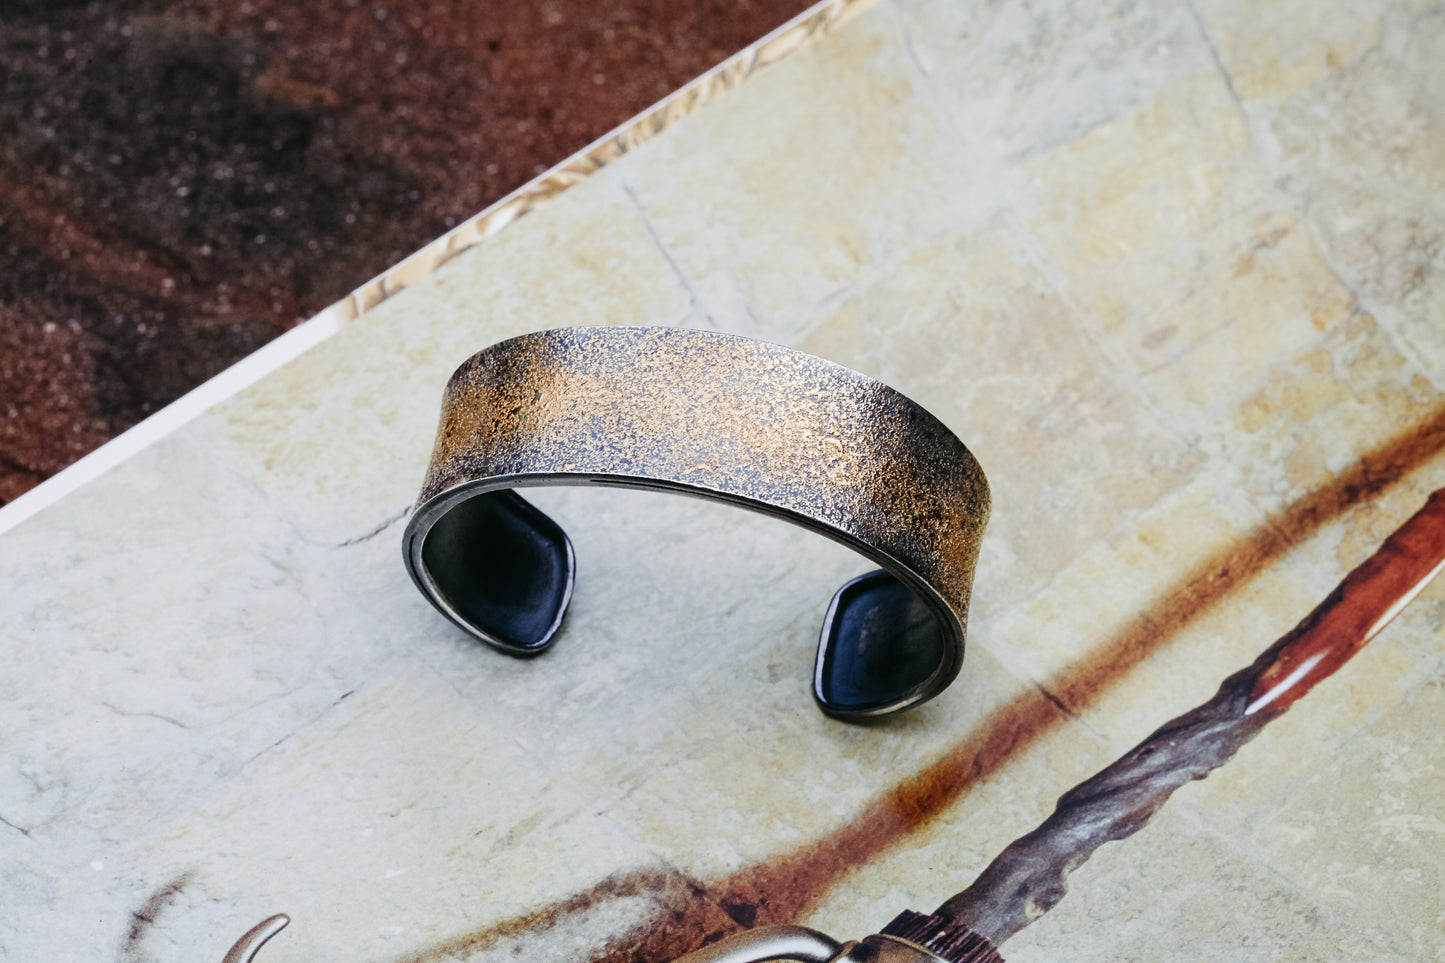 Oxidized Sterling Silver and 24k Gold "Fairy Dust" Narrow Cuff